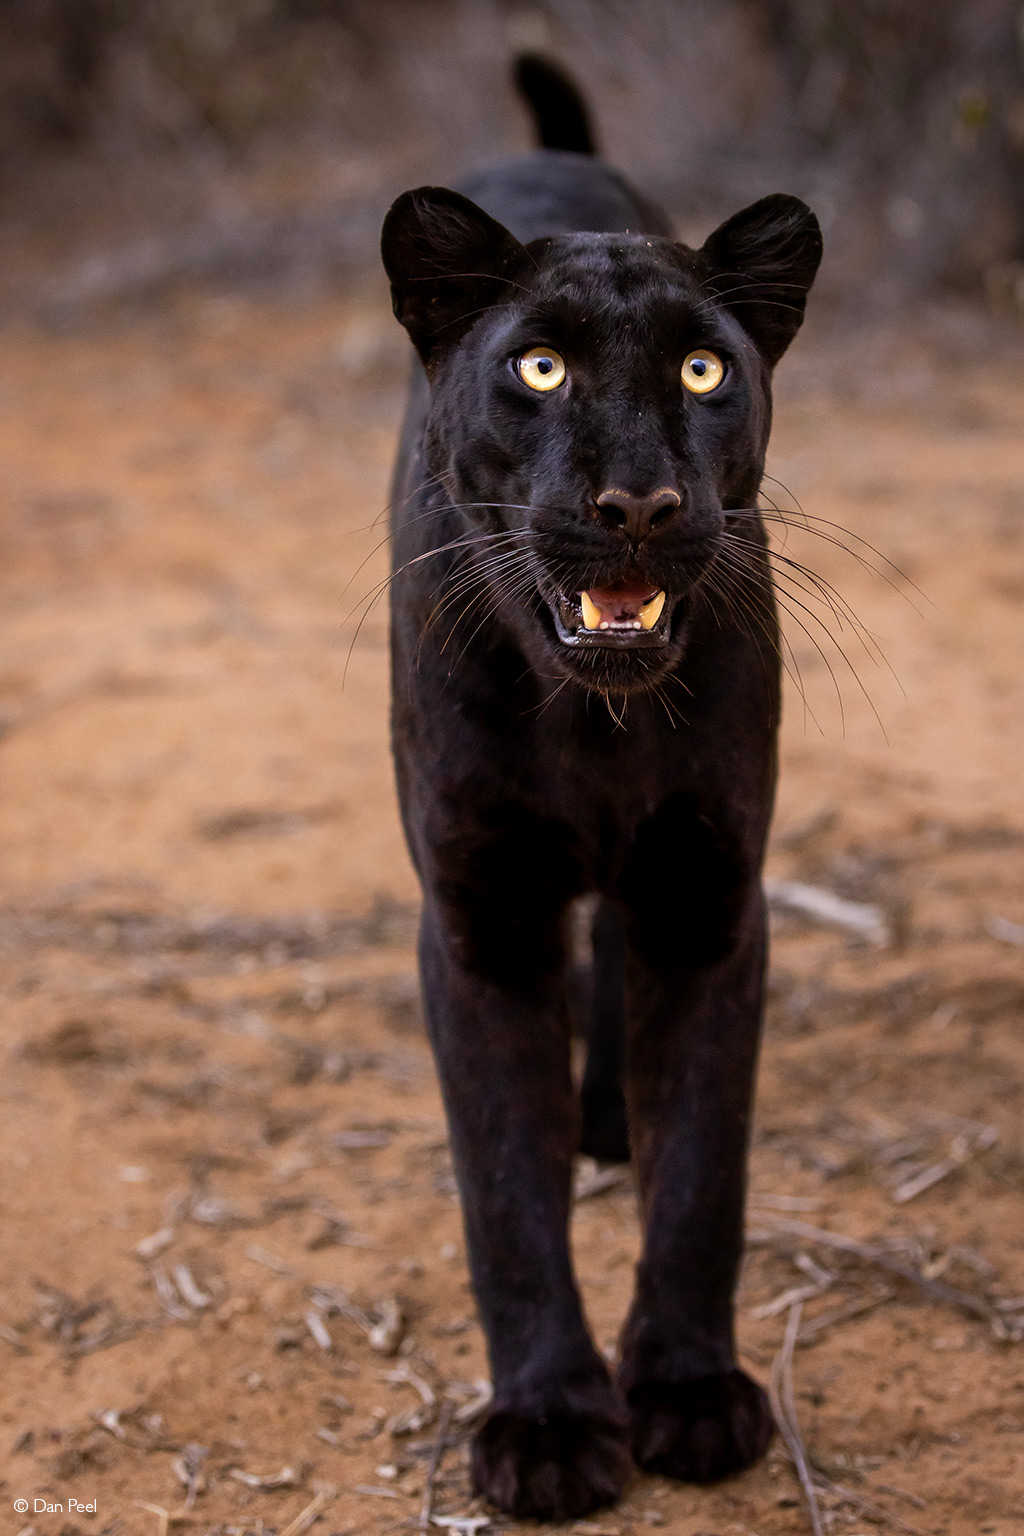 Extraordinary Rare Photos Show Stunning Black Panther in African